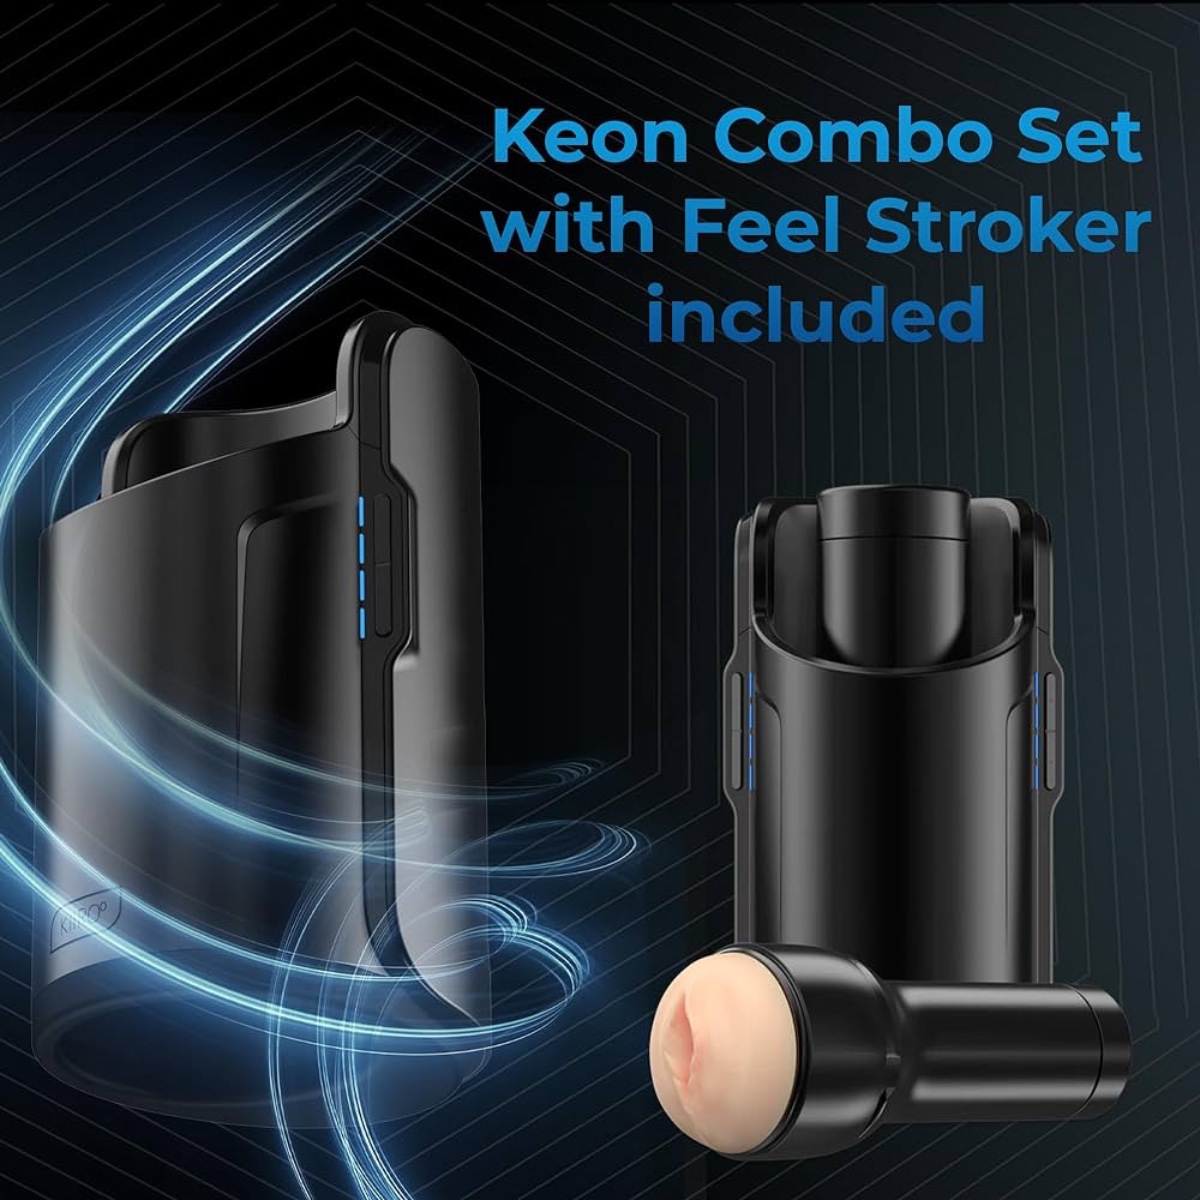 Latest Innovations and Updates in Kiiroo Keon